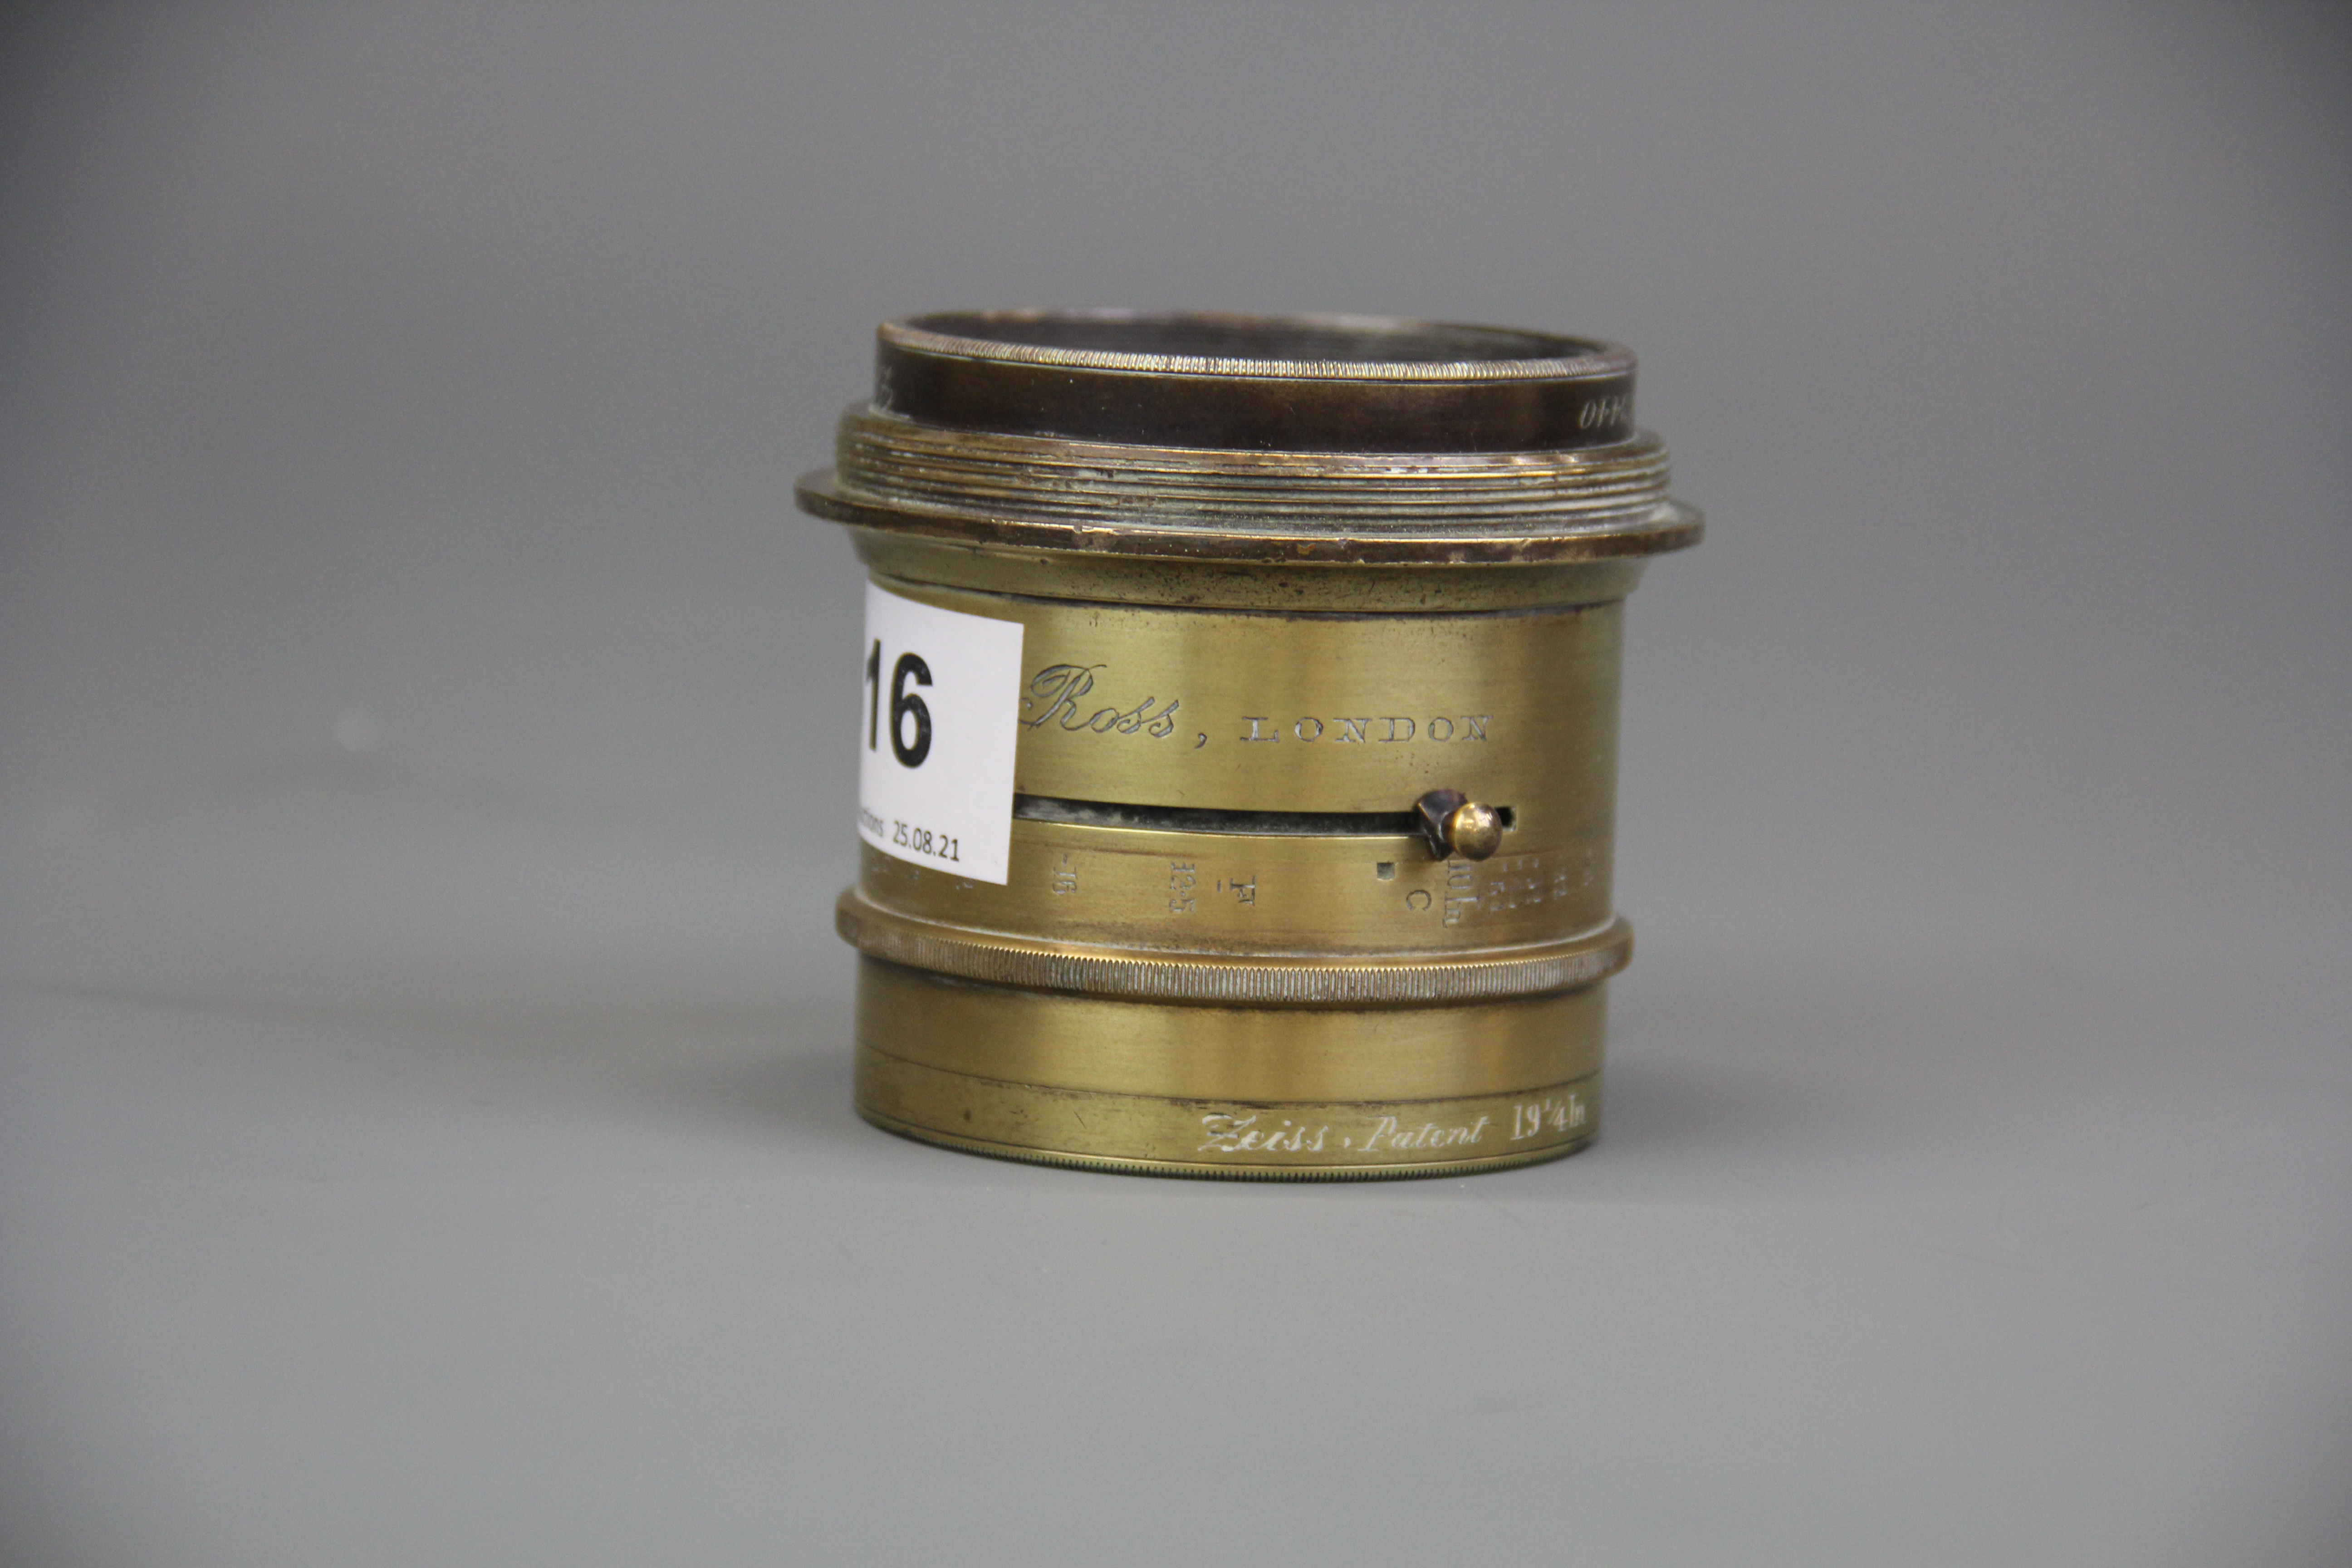 A Ross London Zeiss convertible anastigmat brass bound camera lens. Zeiss patent 19 1/4 front lens - Image 5 of 5